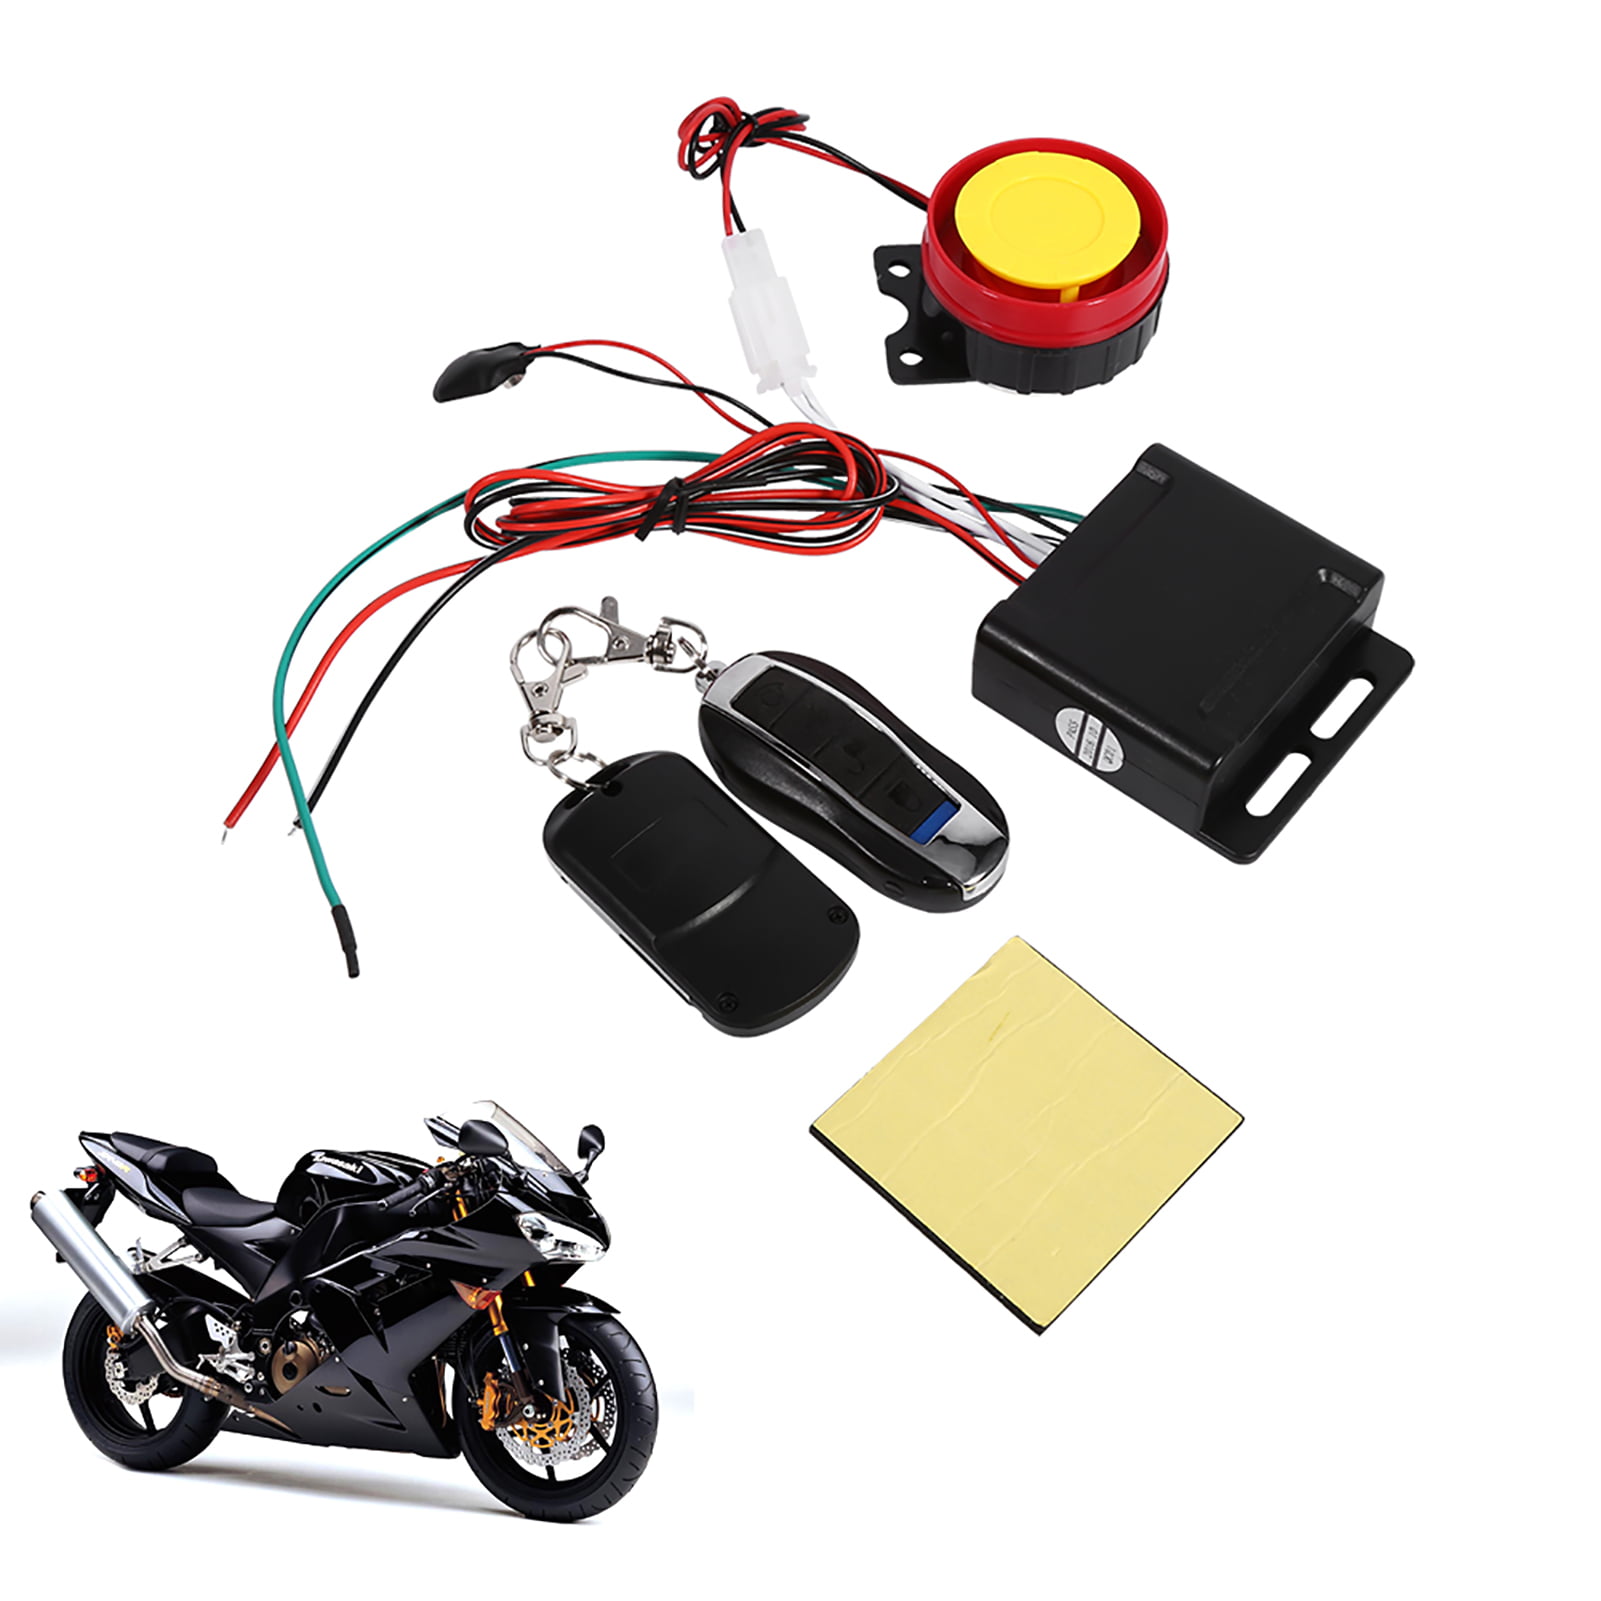 12V Car Security Alarm System 2x Remote Control Anti-theft Motorcycle Bike